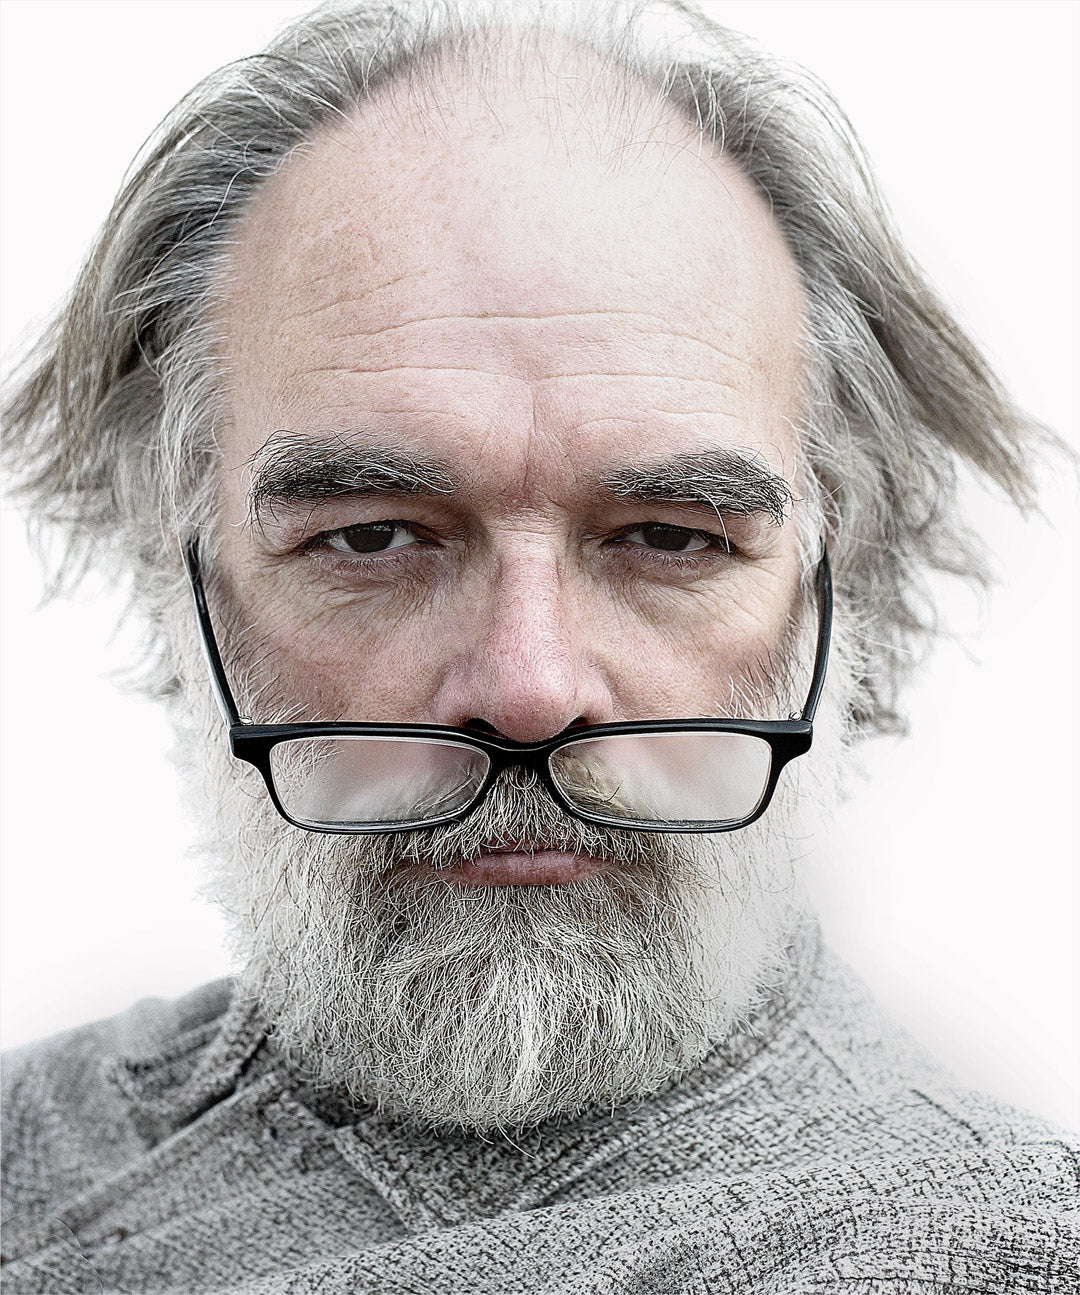 Serious looking man with long grey hair with his glasses humorously hanging off the end of his nose